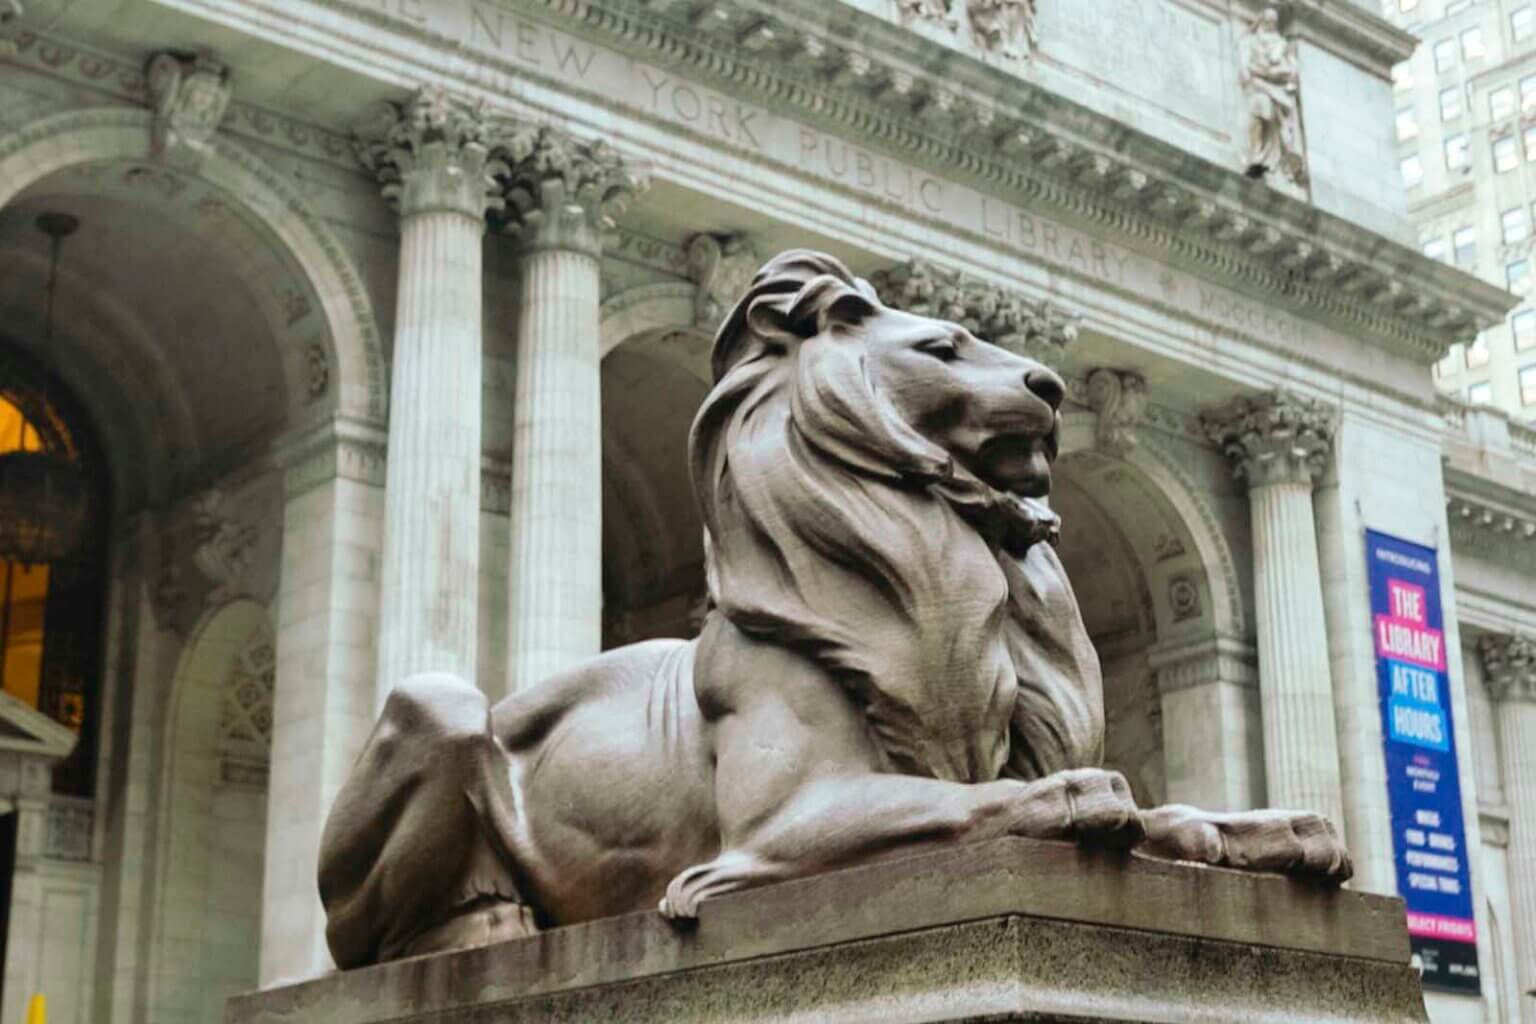 famous lion statues outside New York Public Library in NYC where Ghostbusters was filmed